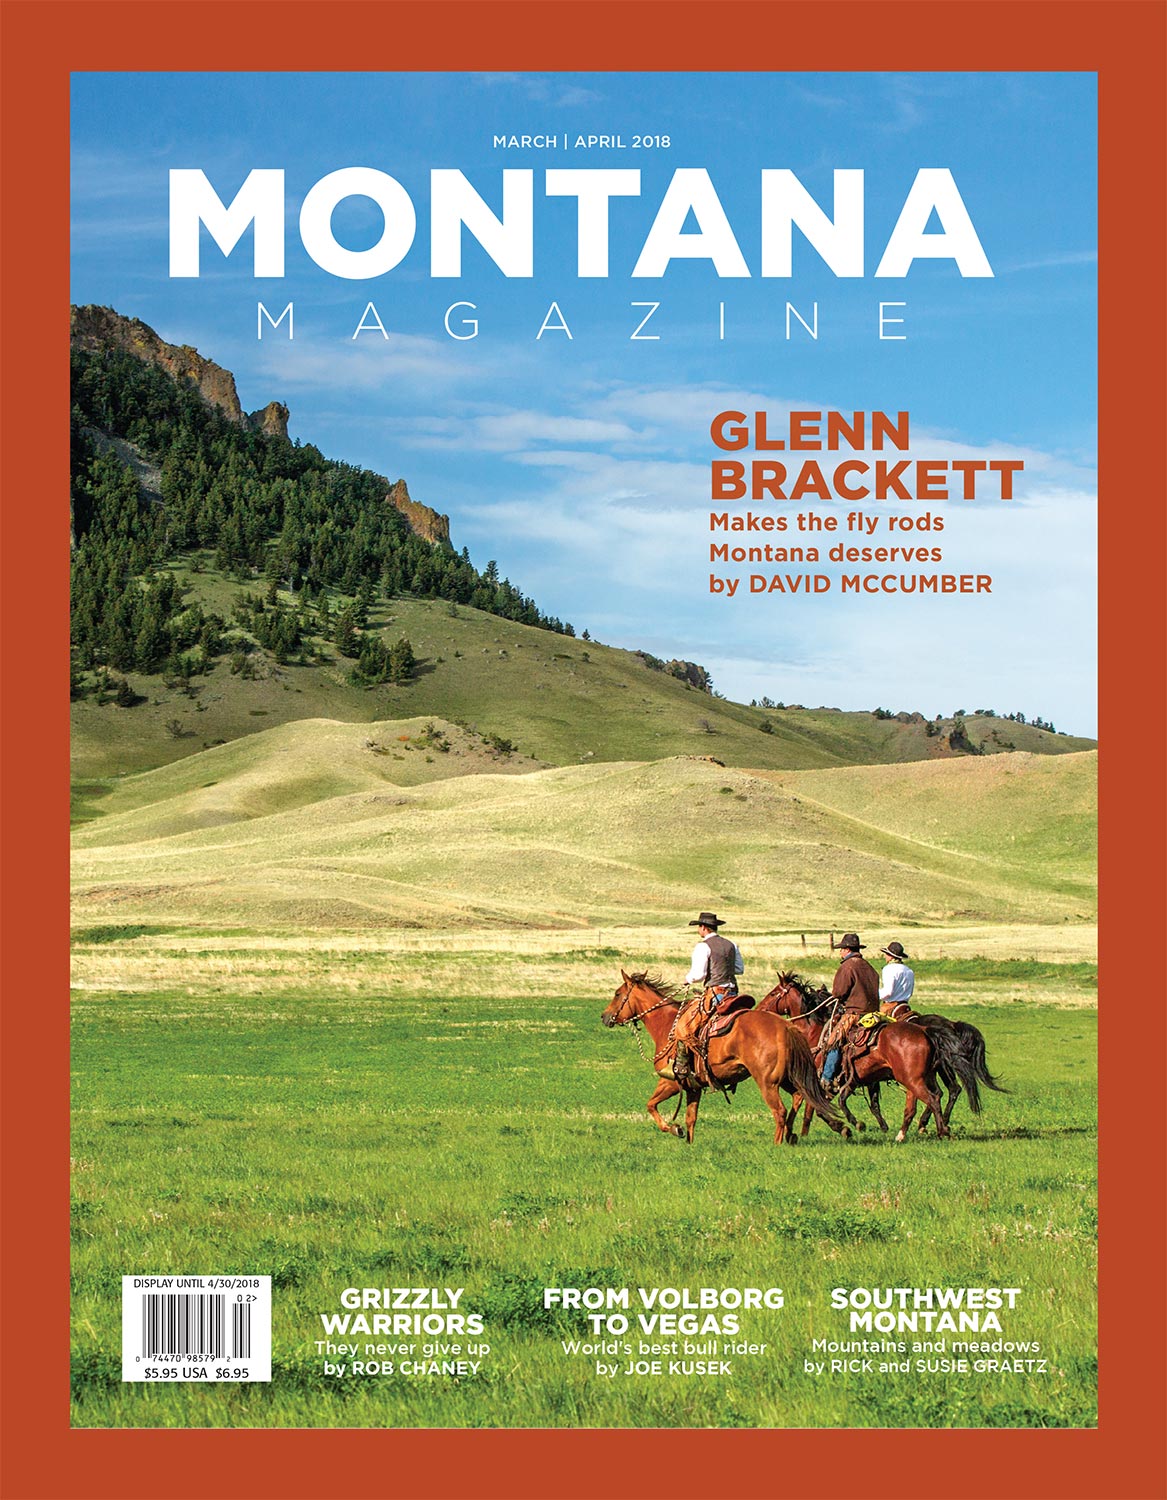 Cowboy Photos Appear in March 2018 Issue of Montana Magazine